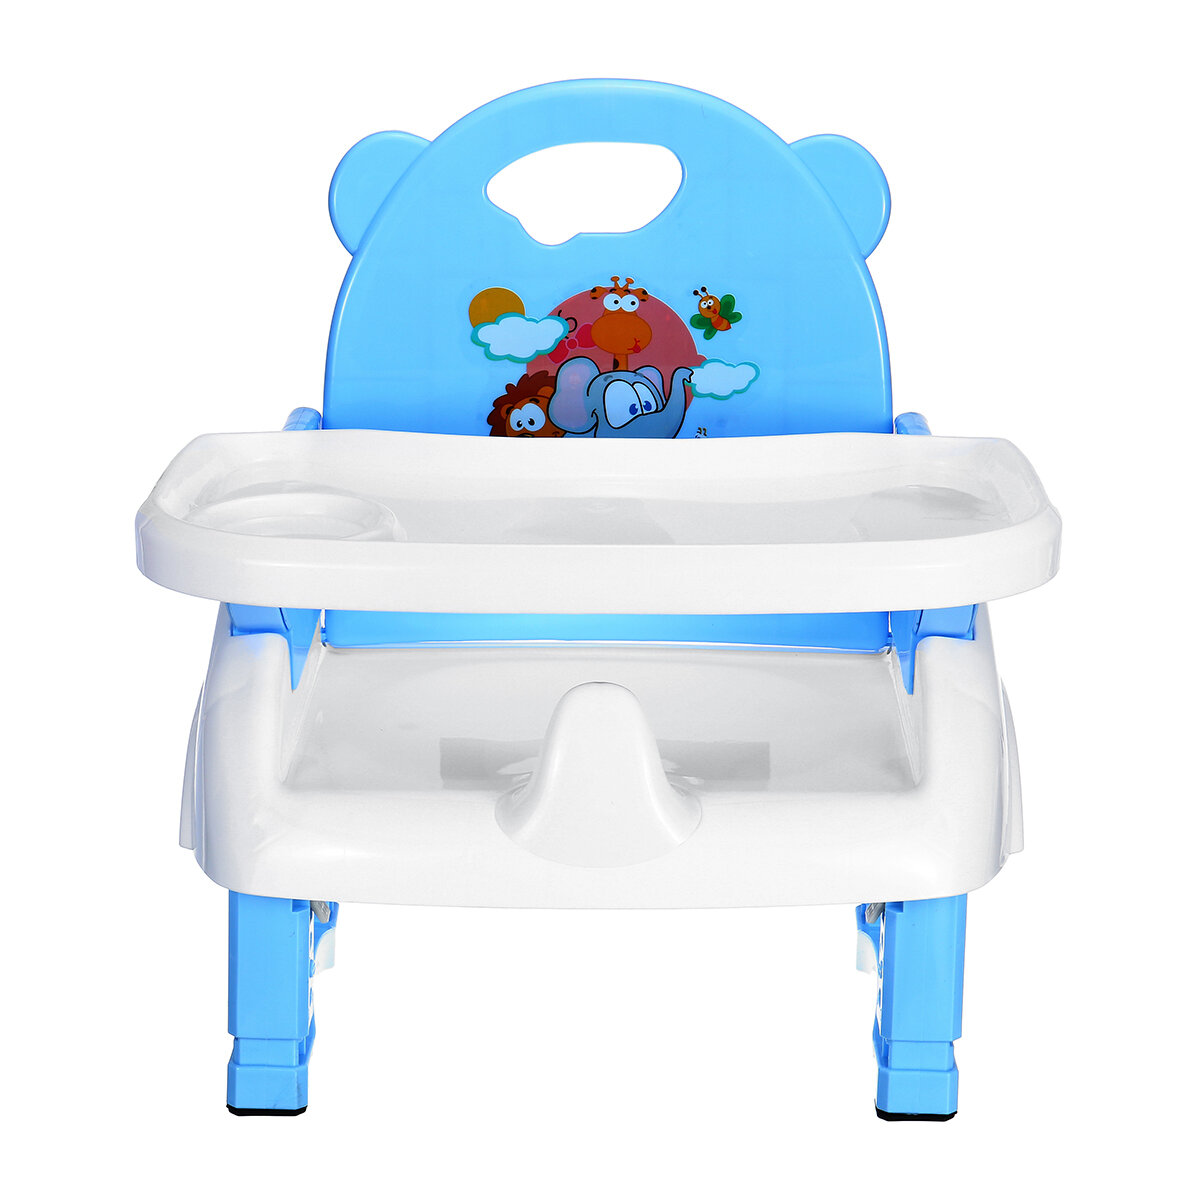 Image of 4 in1 Adjustable Baby Chairs Feeding Dining Table Seat Belt Dinner Plate Mat